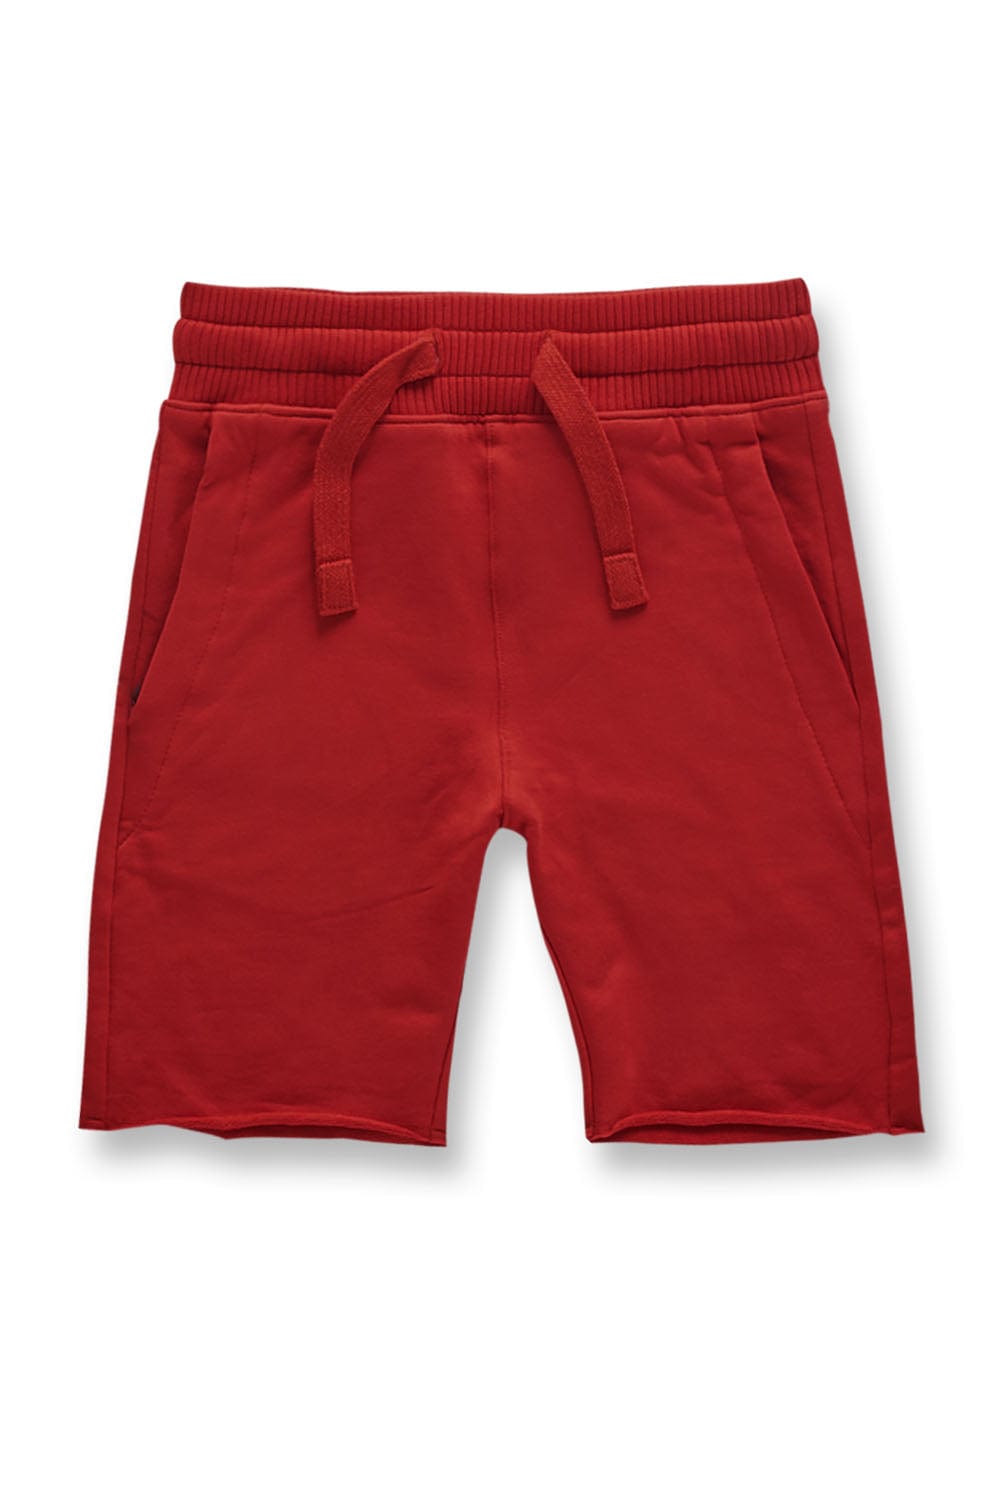 JC Kids Kids Palma French Terry Shorts (Name Your Price) Red / 2